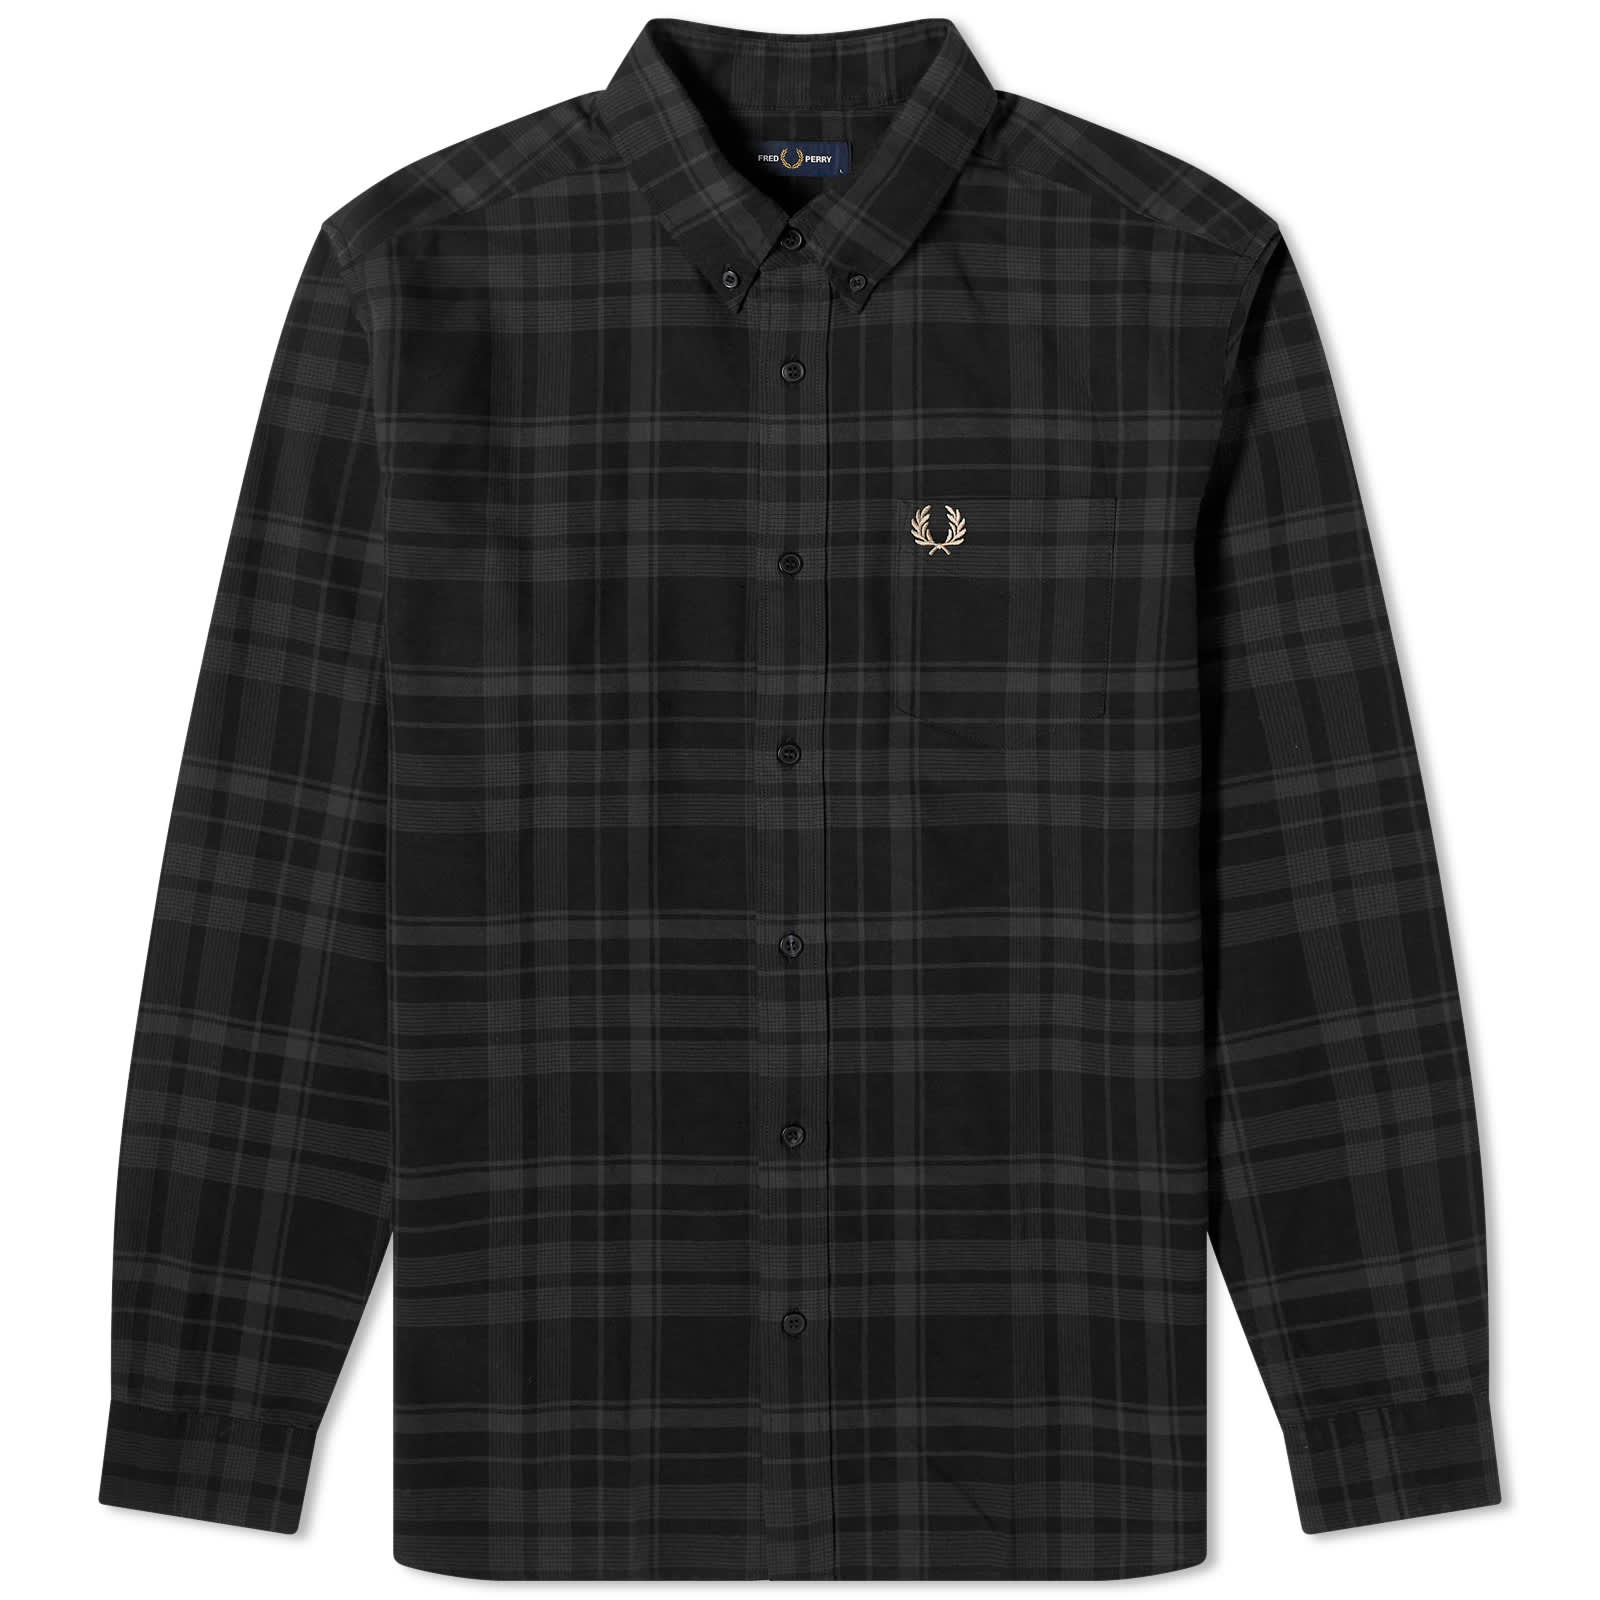 Рубашка Fred Perry Twill Tartan, черный рубашка fred perry panel polo цвет whisky brown